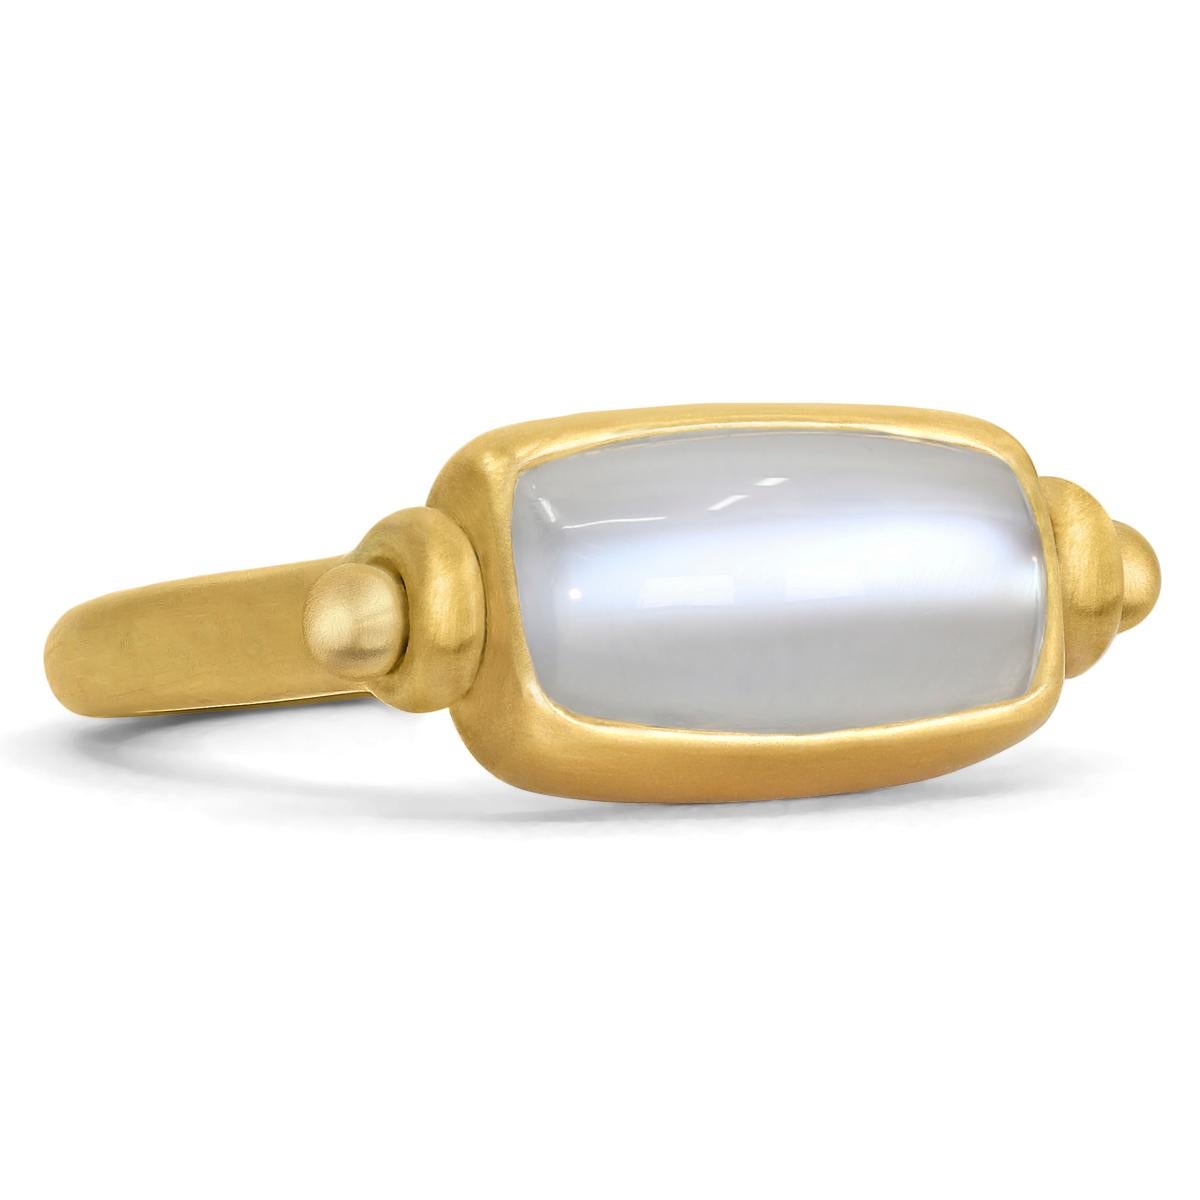 One of a Kind Swivel Ring handfabricated by acclaimed jewelry maker Denise Betesh, showcasing a magnificent natural 5.27 carat platinum cat's-eye moonstone sugarloaf cabochon bezel-set in the artist's luscious 22k yellow gold atop her signature 20k